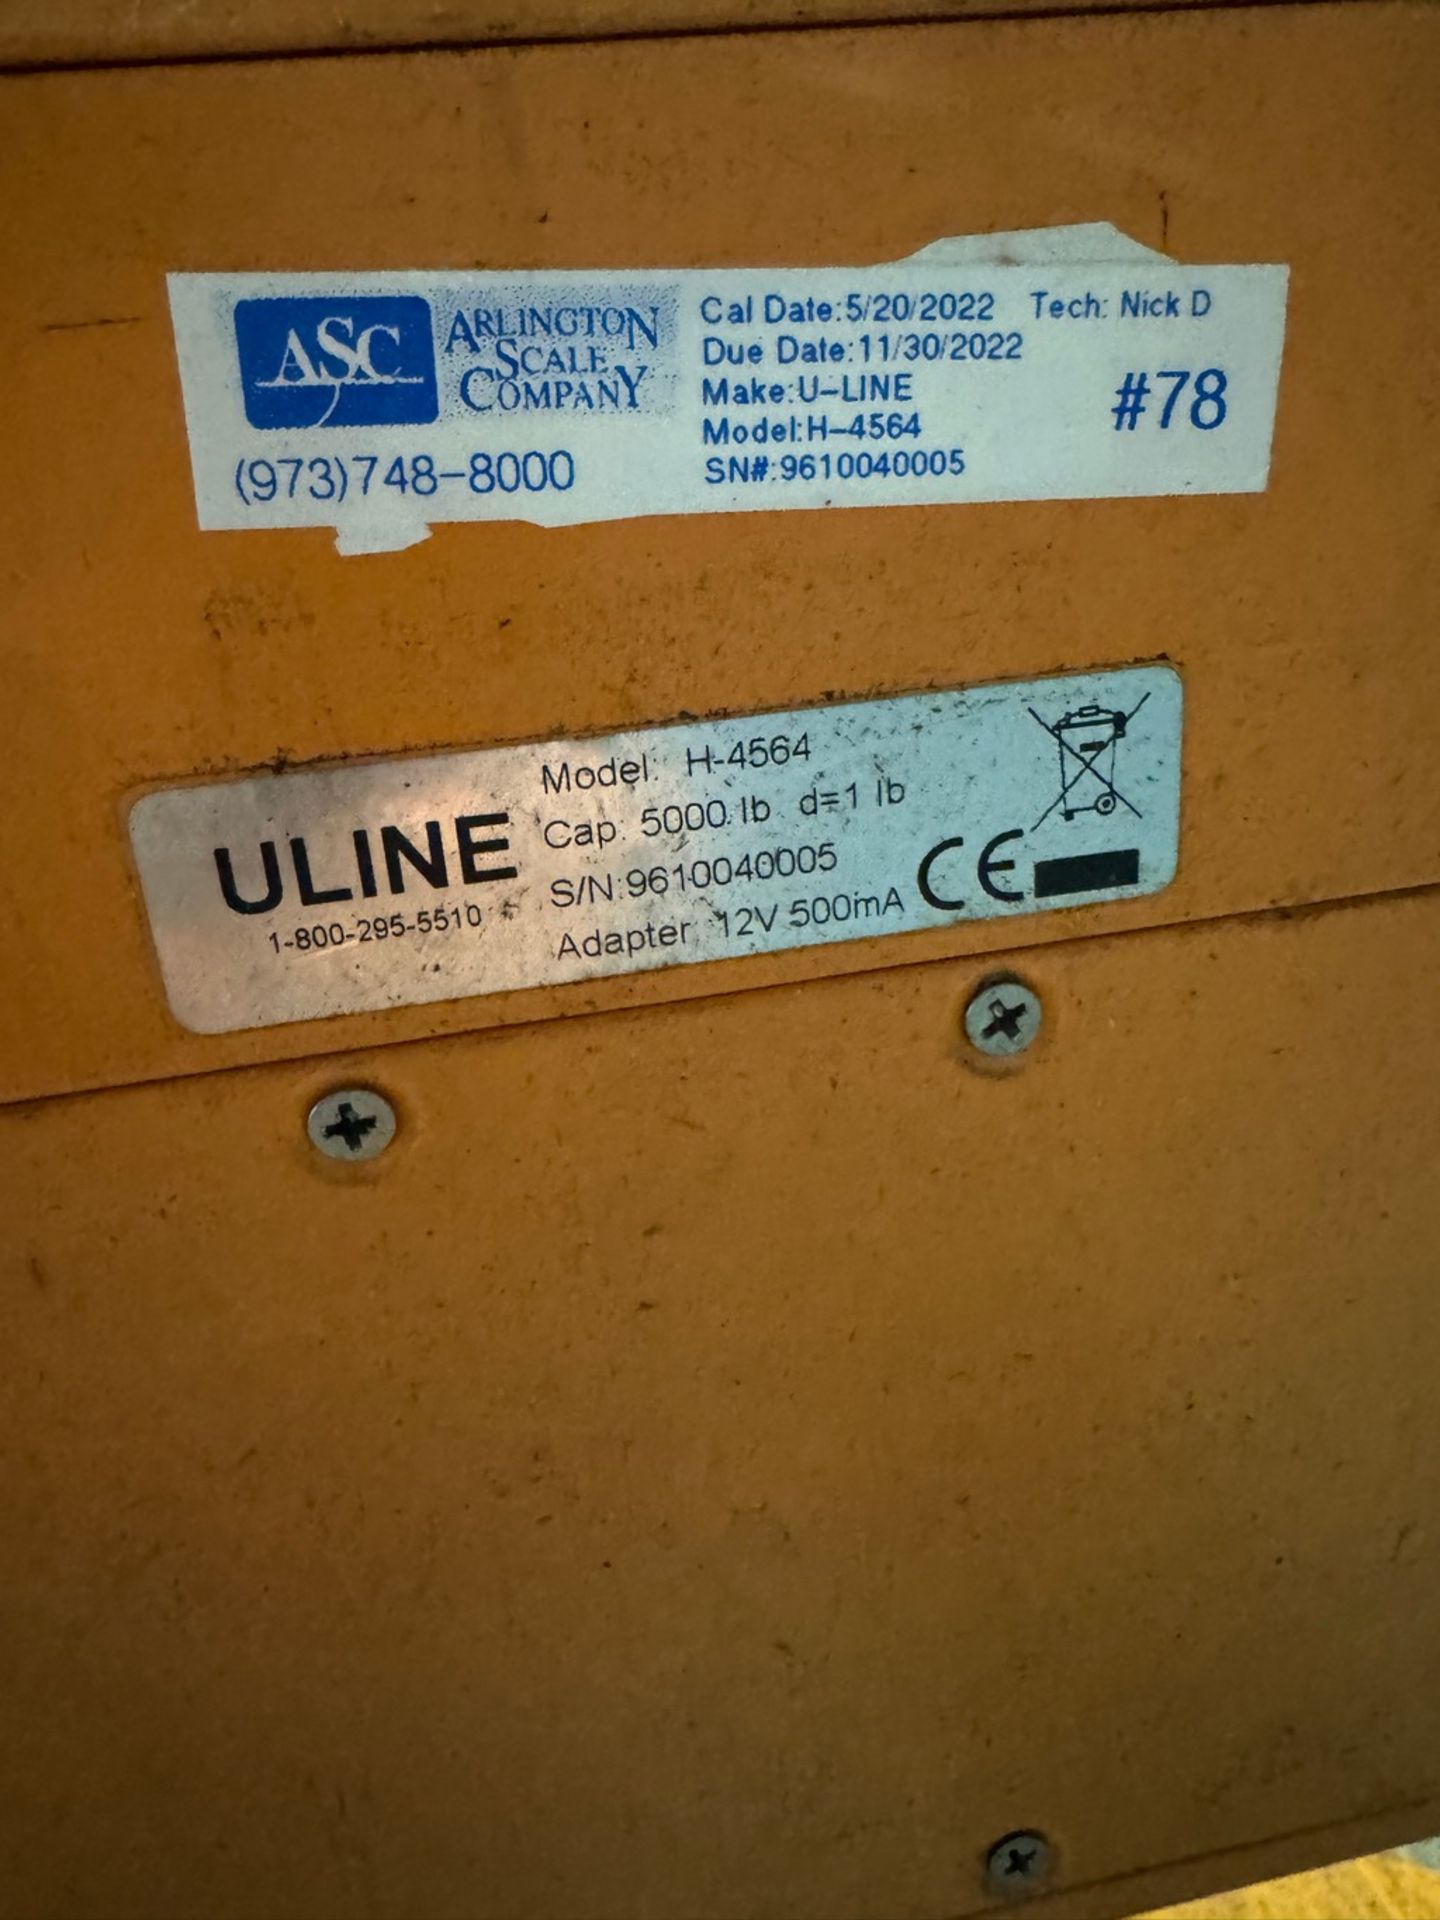 5500 LB Uline H-4564 Pallet Jack with Scale - Image 4 of 4